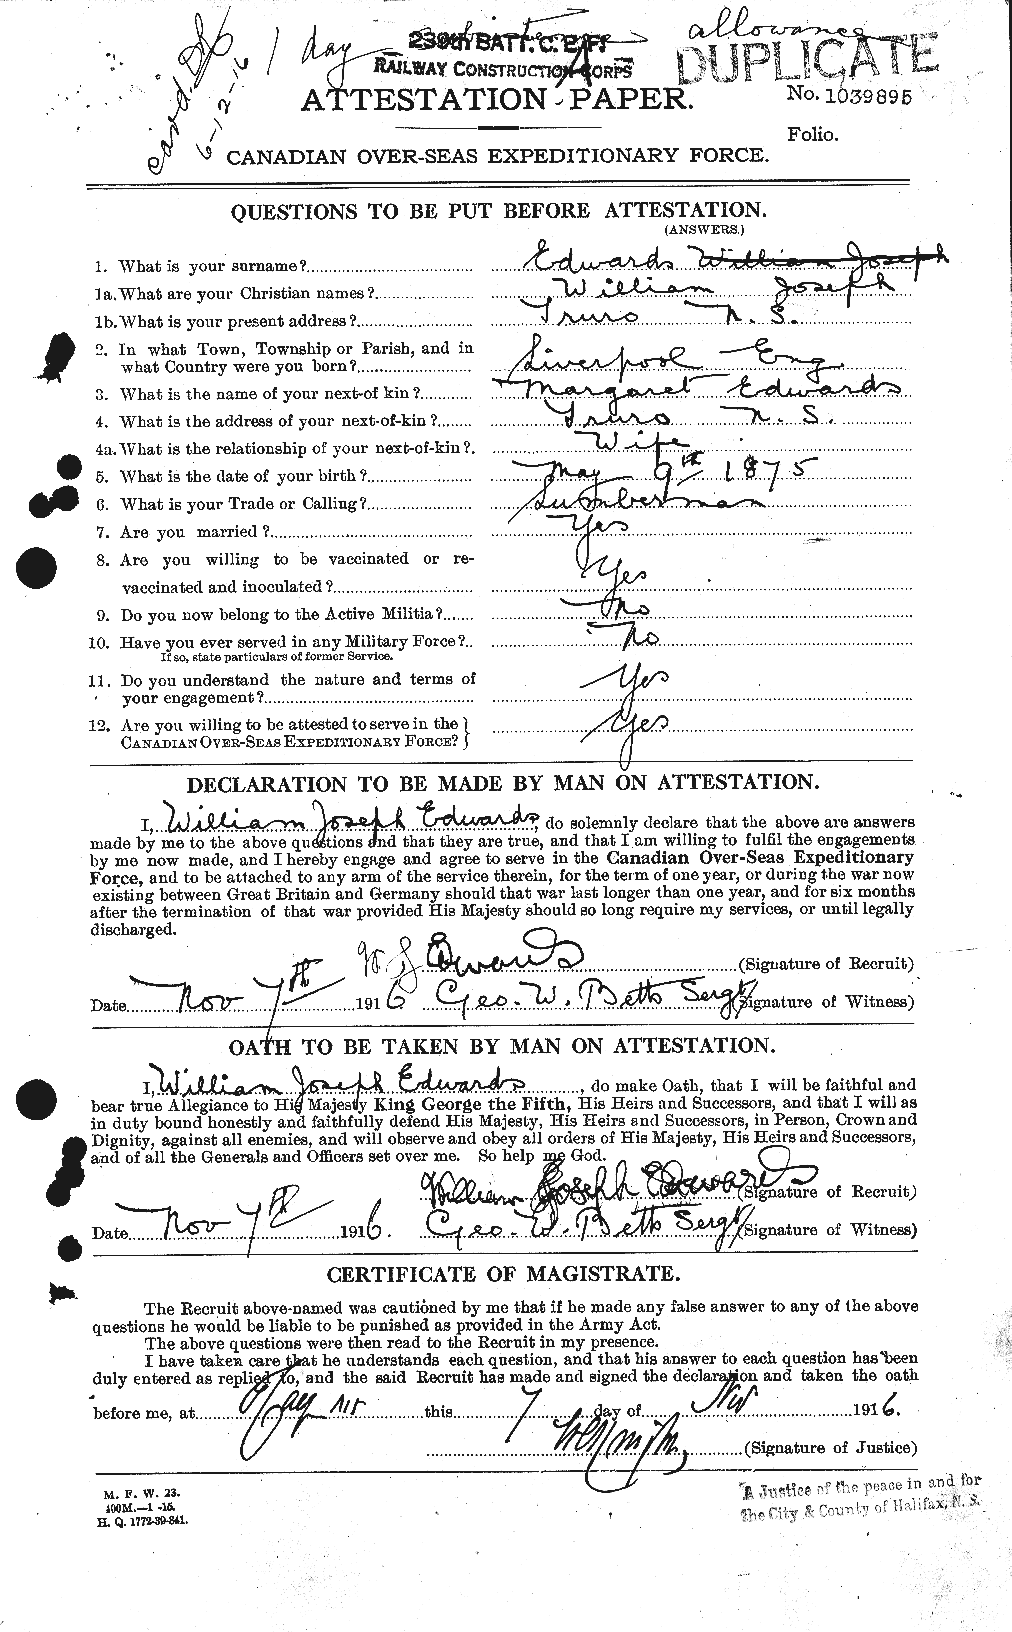 Personnel Records of the First World War - CEF 311929a